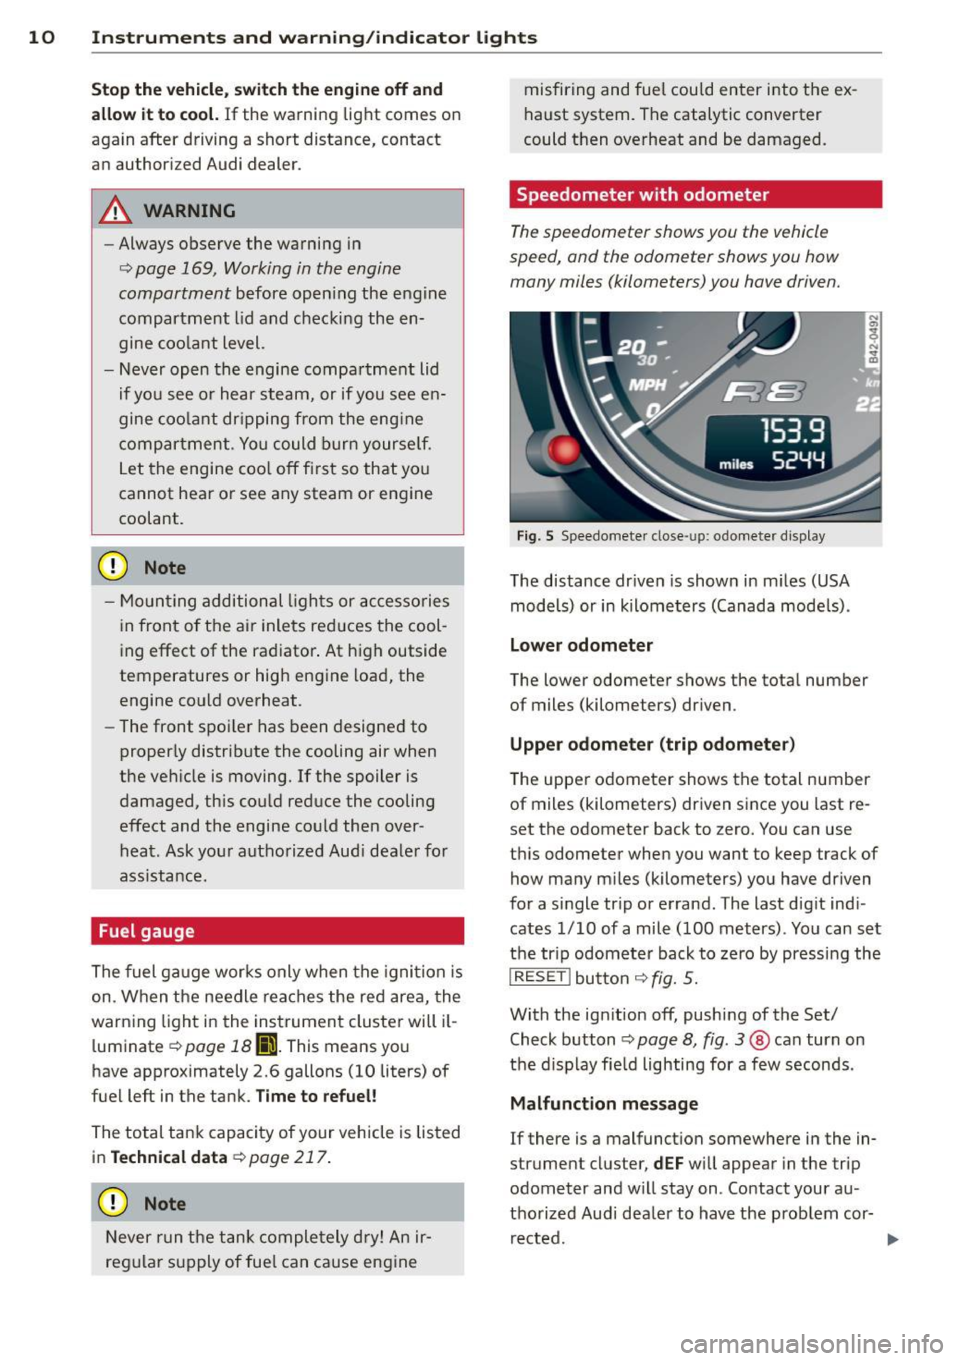 AUDI R8 SPYDER 2012  Owners Manual 10  Instrum ents  a nd warning /indic ato r  li ghts 
Stop the  vehicl e, sw itch the  engin e off and 
allo w it  to  coo l. 
If the  warning  light  comes  on 
again  after  driving  a  short  dista